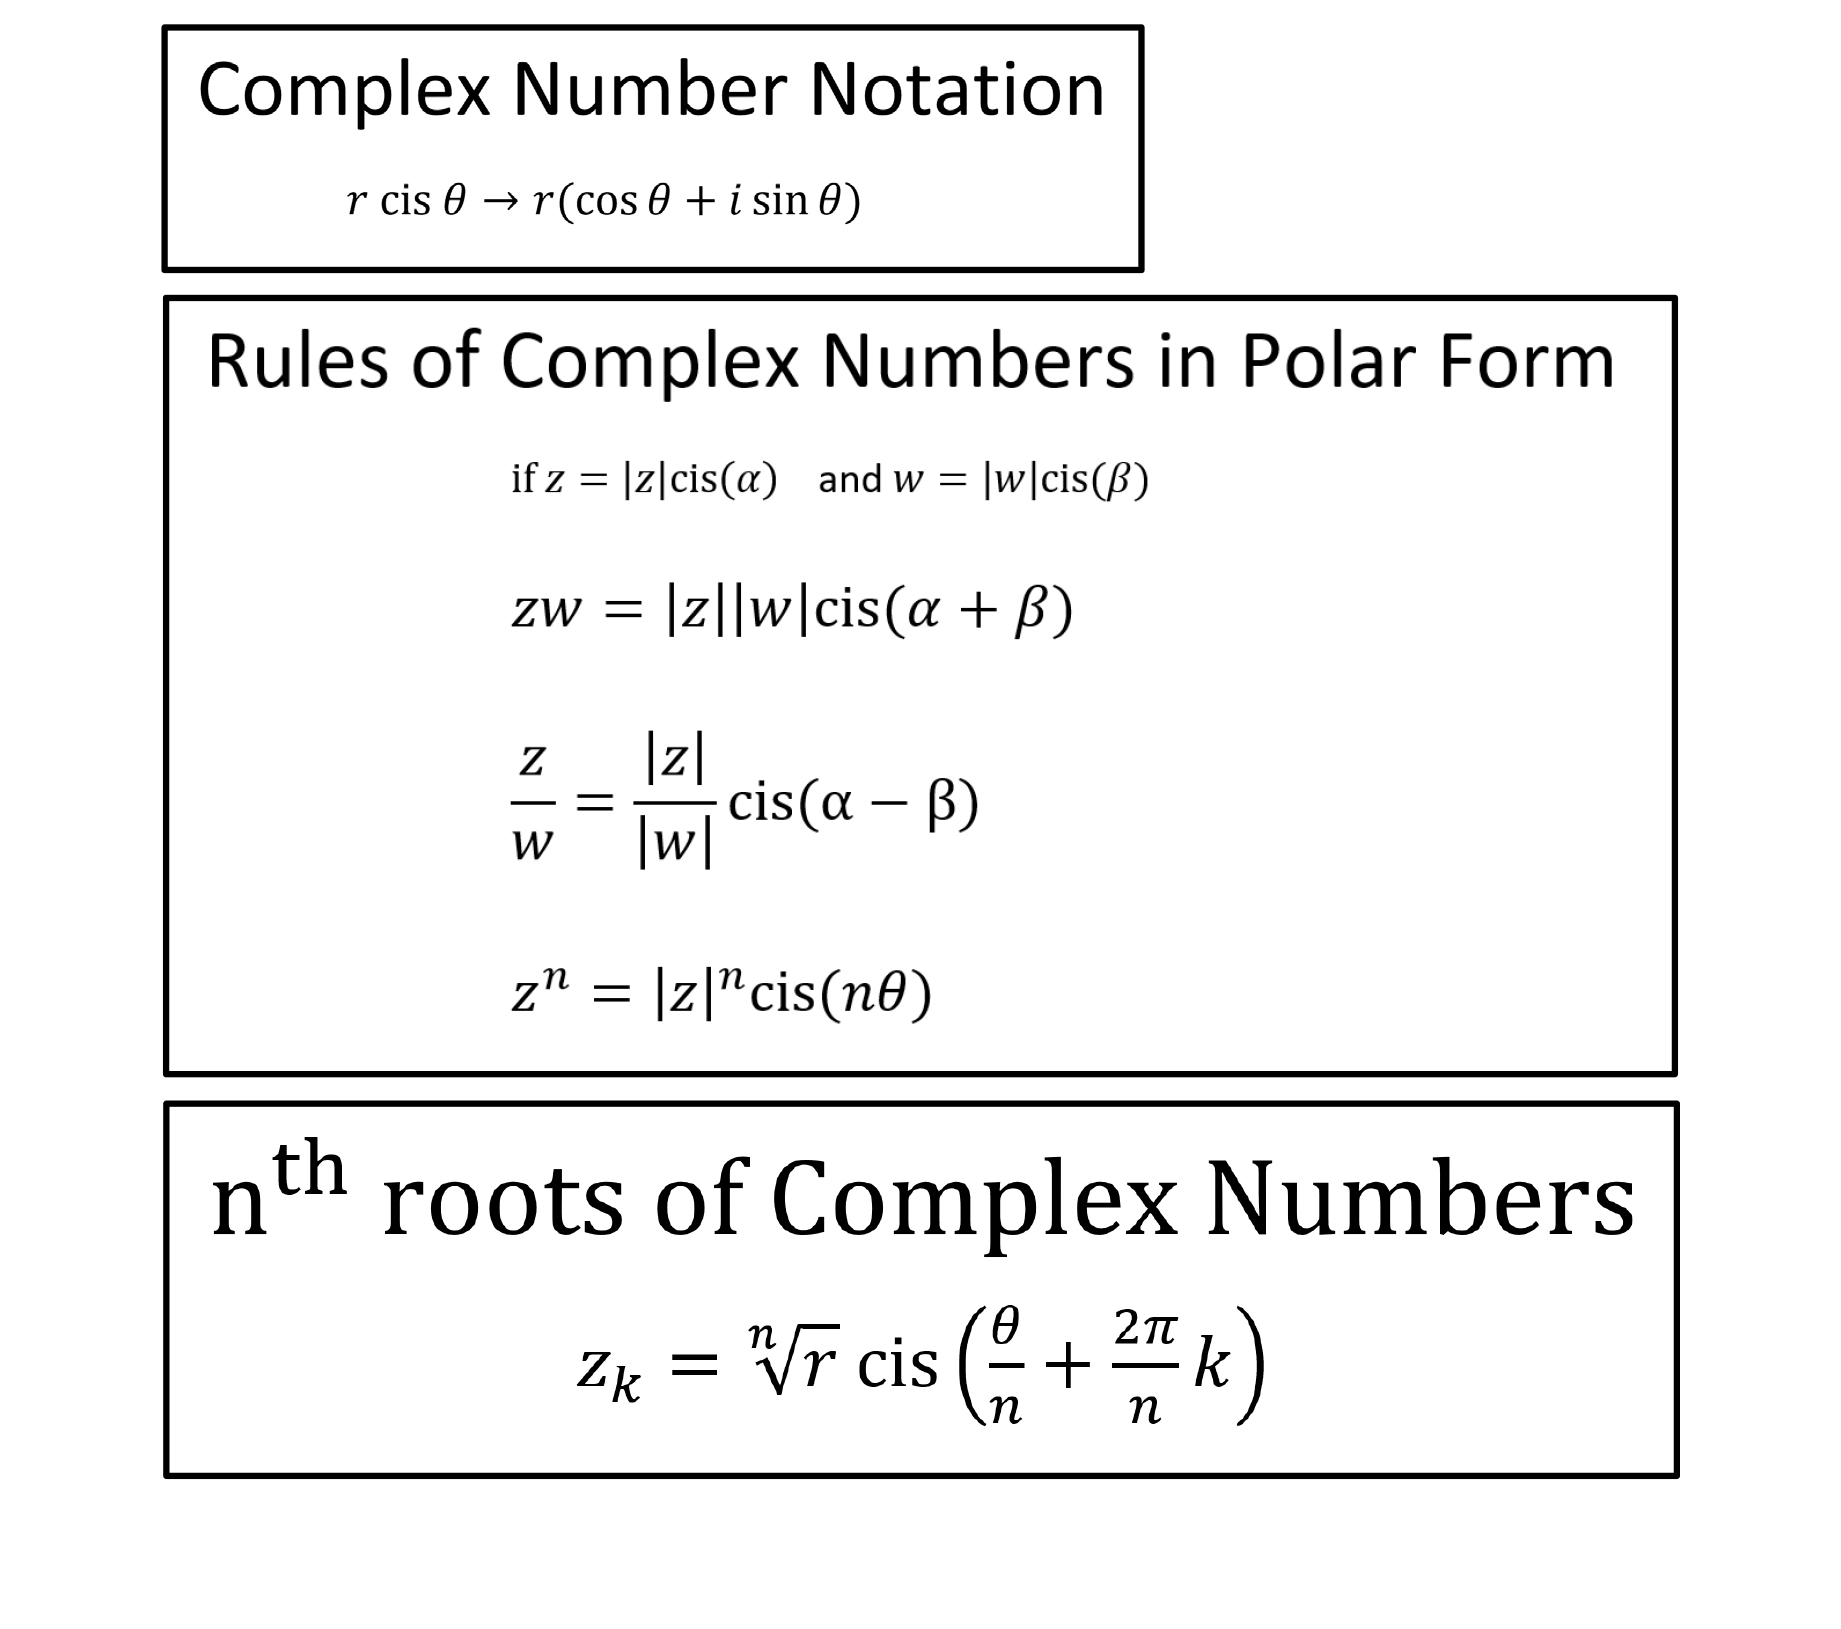 roots-of-complex-polar-numbers-de-moivre-s-andymath